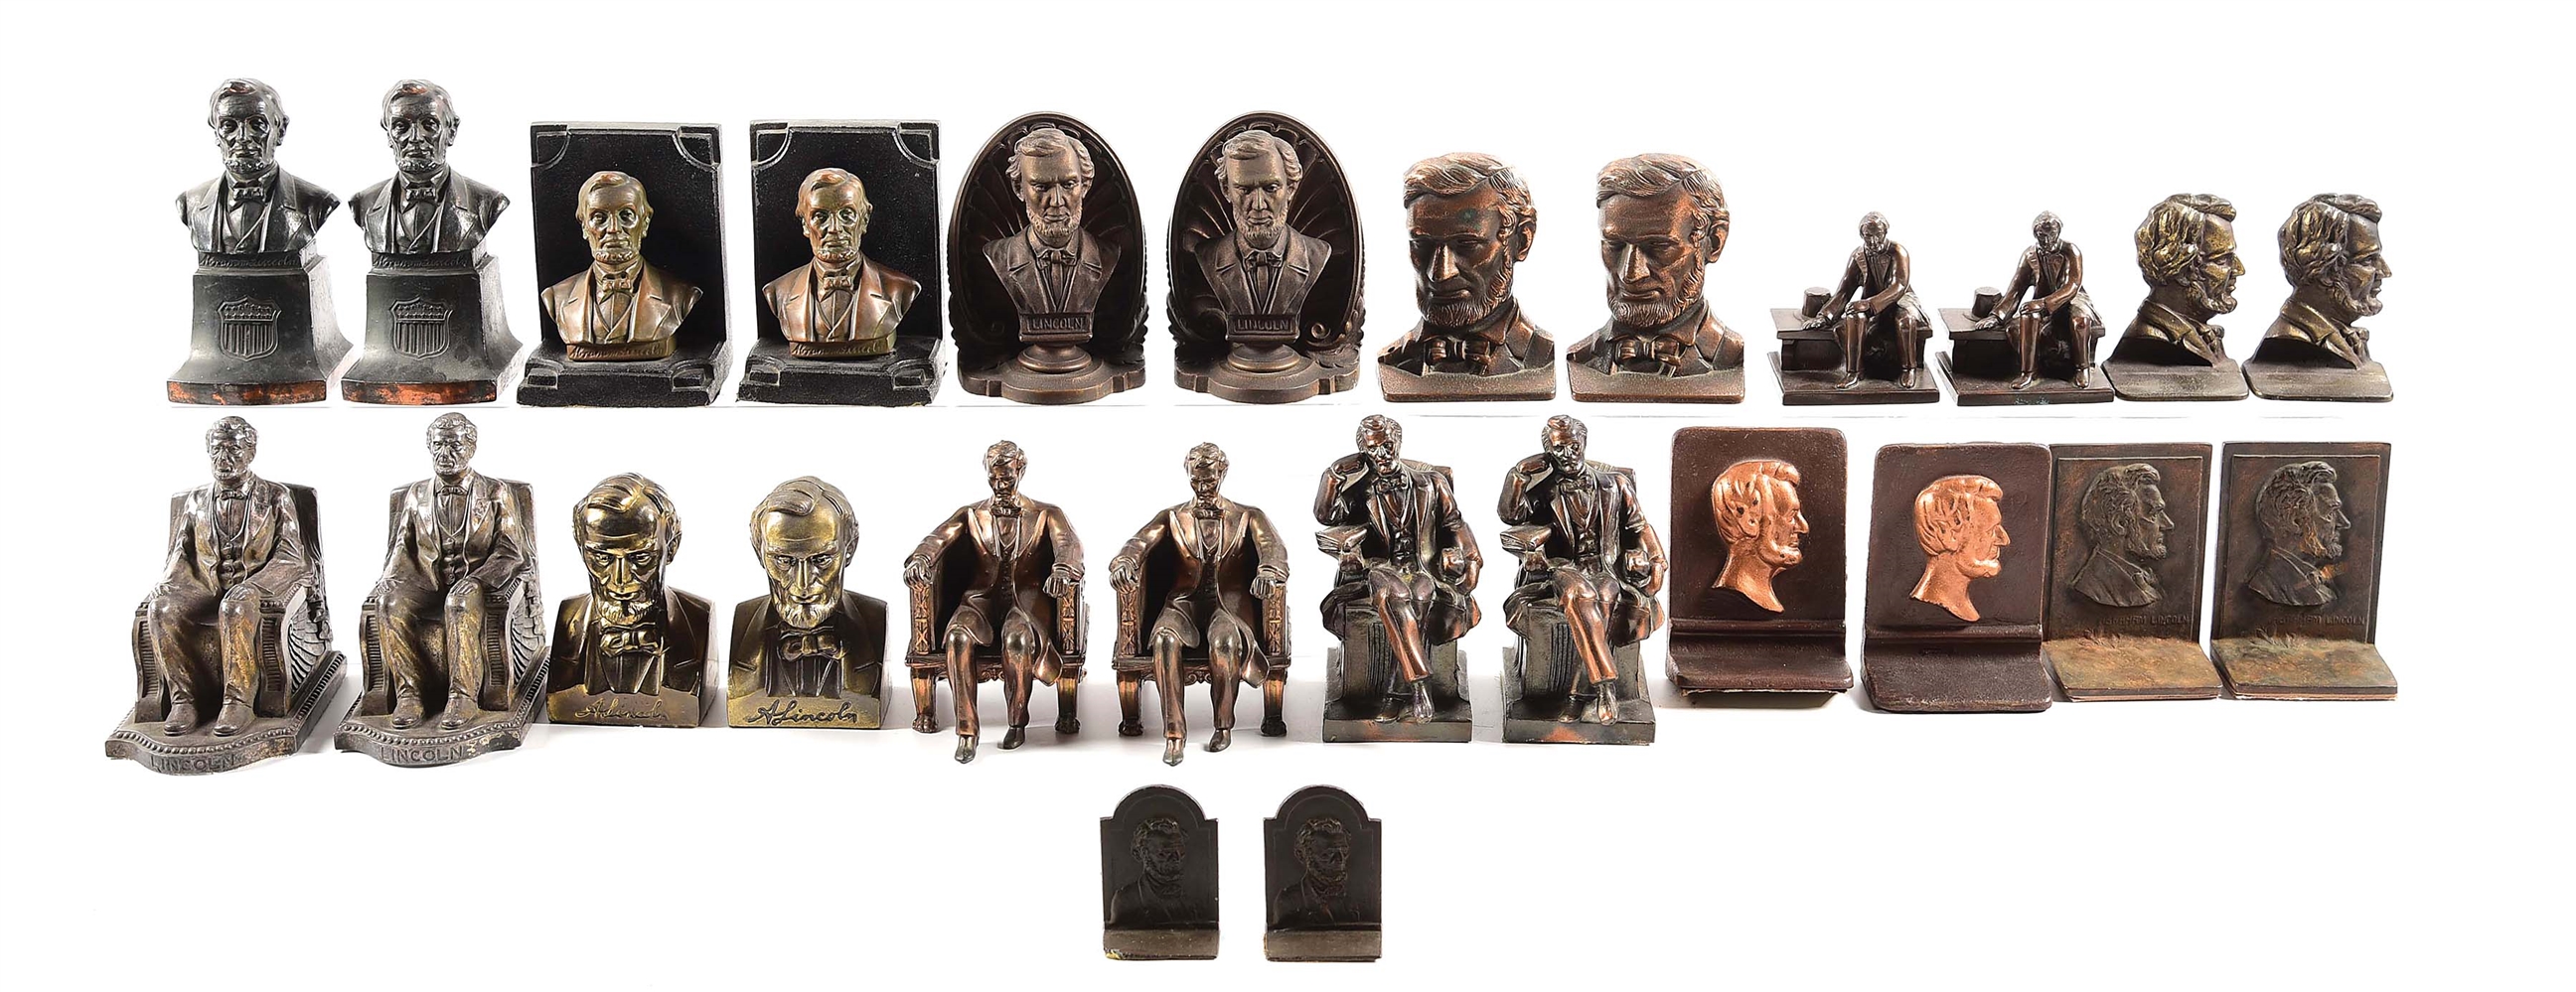 LARGE LOT OF ABRAHAM LINCOLN BOOK ENDS.